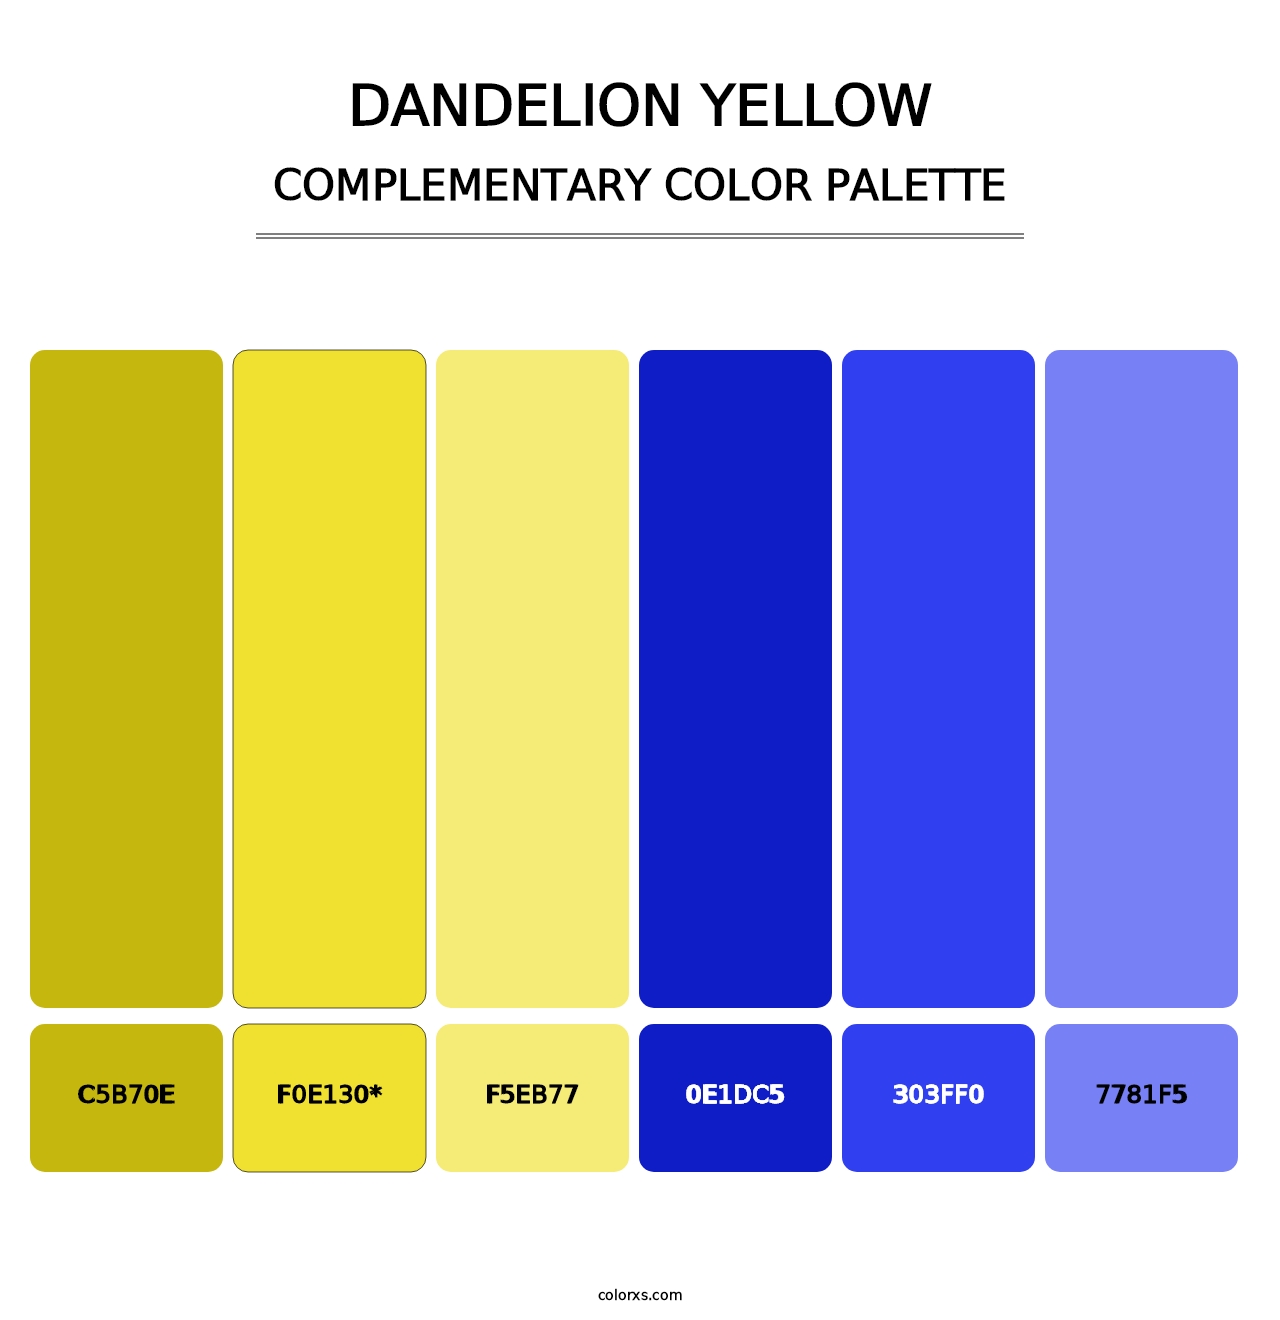 Dandelion Yellow - Complementary Color Palette